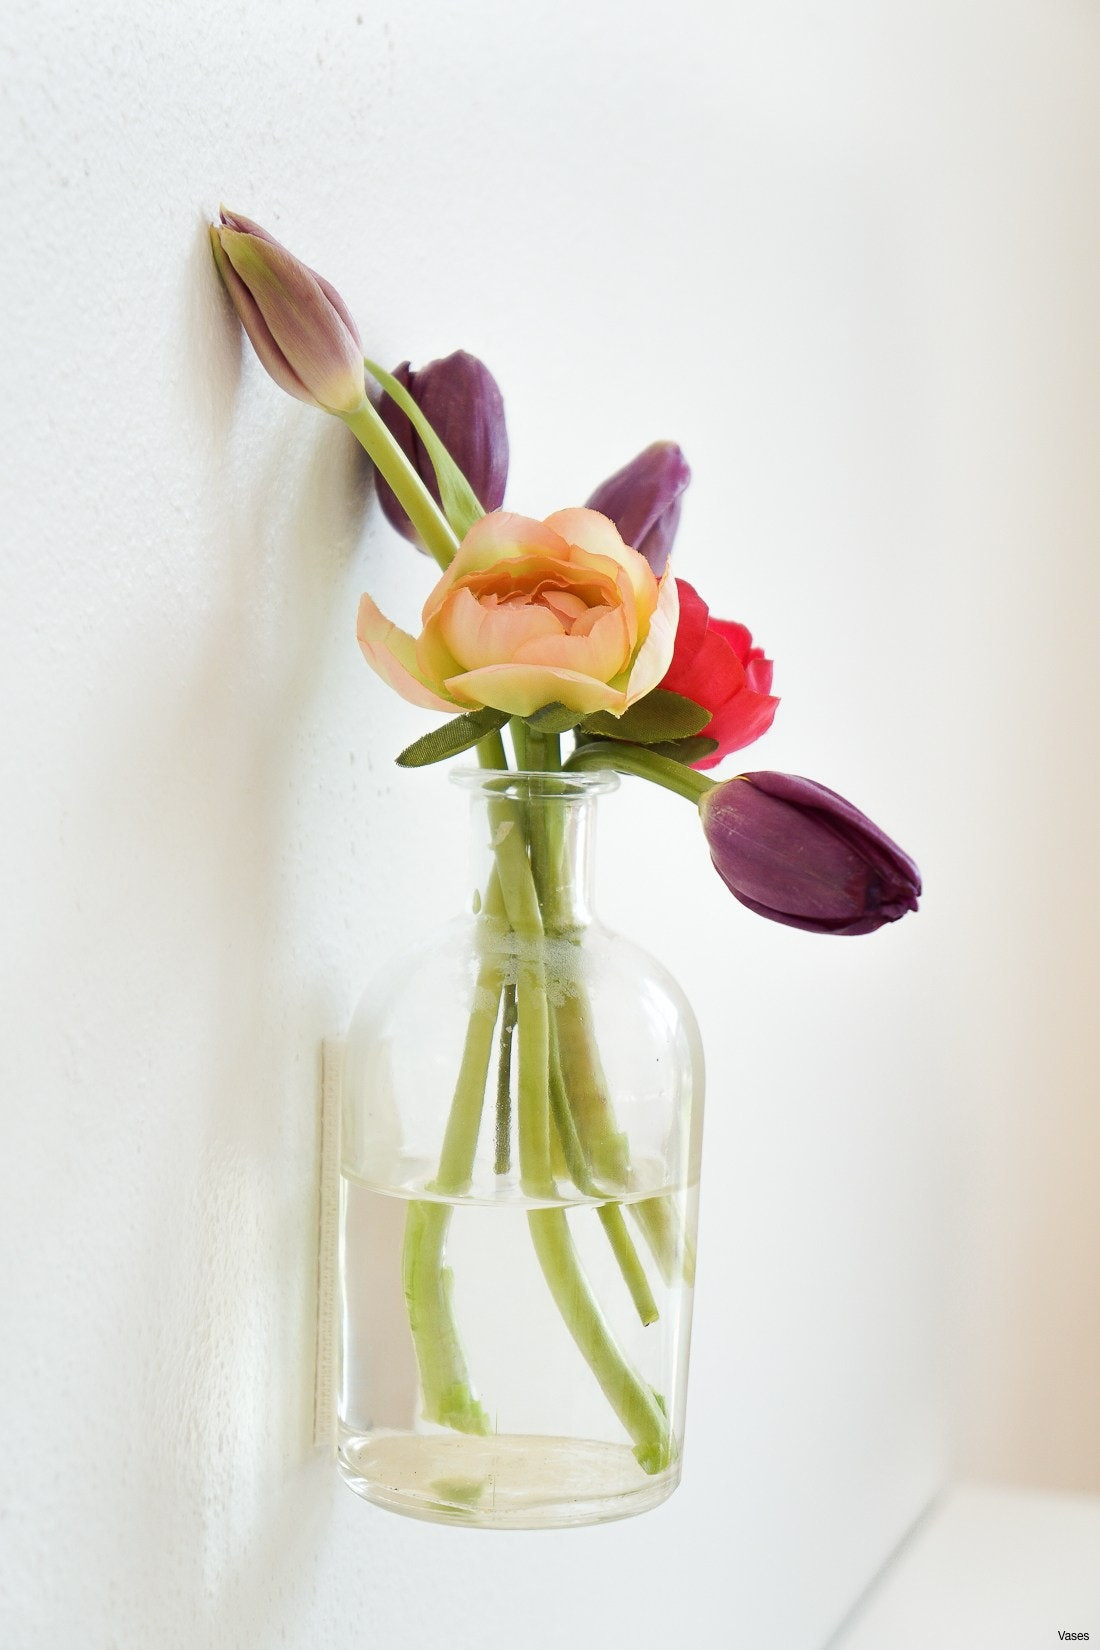 29 Unique Pictures Of Roses In A Vase 2024 free download pictures of roses in a vase of small white flowers for vases flowers healthy with regard to il fullxfull l7e9h vases wall flower vase zoomi 0d decor inspiration scheme beautiful flower bouqu